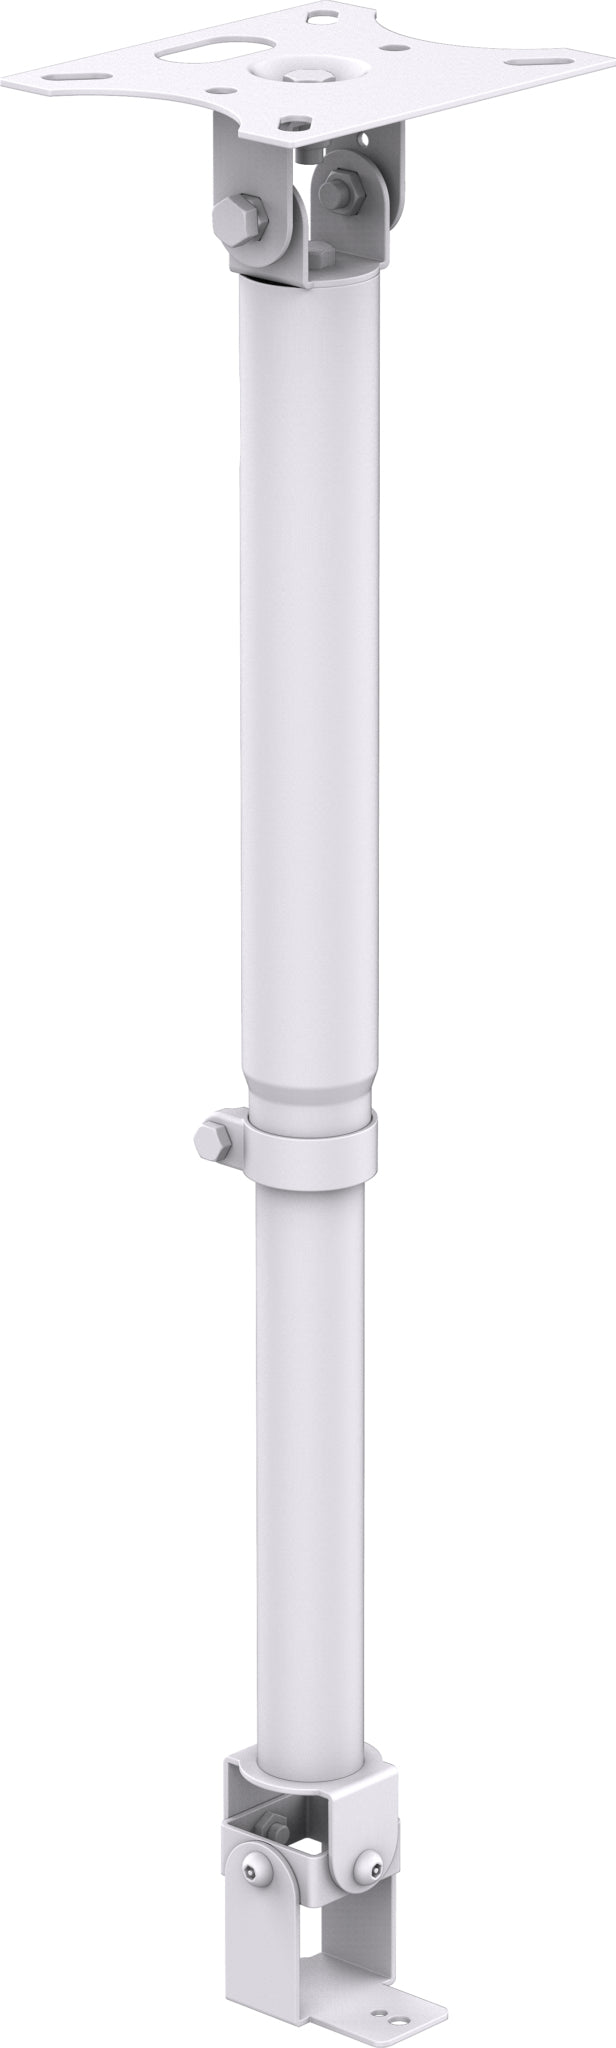 VISION Professional Telescopic Webcam Ceiling Mount - LIFETIME WARRANTY - pole length 440-740 mm / 17-29" - fits Logitech Brio web cam for Microsoft Whiteboard - fits any webcam with standard camera screw mounting - cable management - Includes: retro